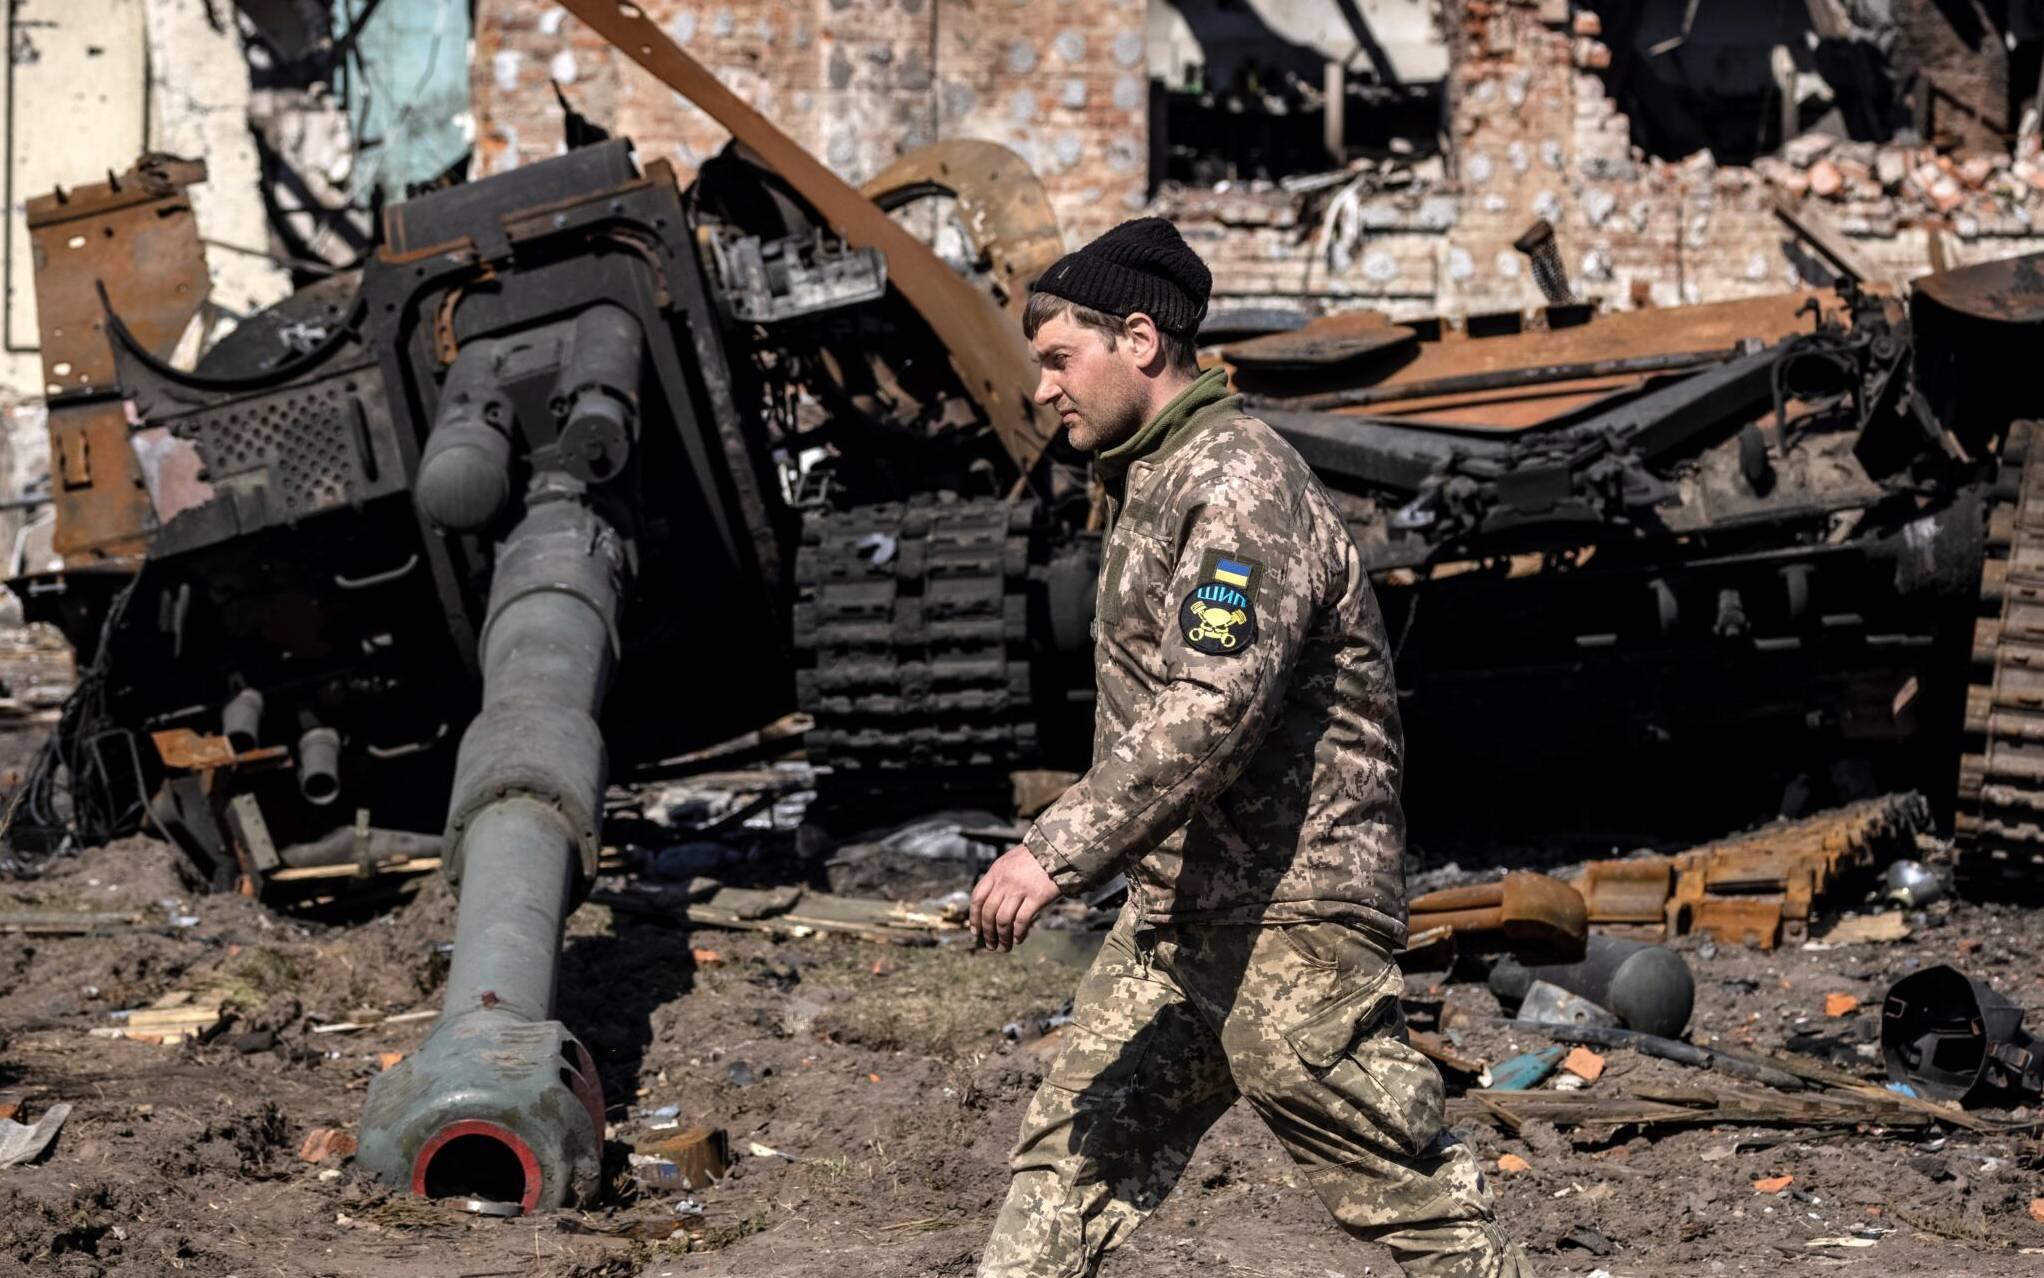 A Ukrainian serviceman walks between damaged Russian army tank and rubble of a destroyed building in the northeastern city of Trostyanets', on March 29, 2022. - Ukraine said on March 26, 2022 its forces had recaptured the town of Trostyanets, near the Russian border, one of the first towns to fall under Moscow's control in its month-long invasion. (Photo by FADEL SENNA / AFP)